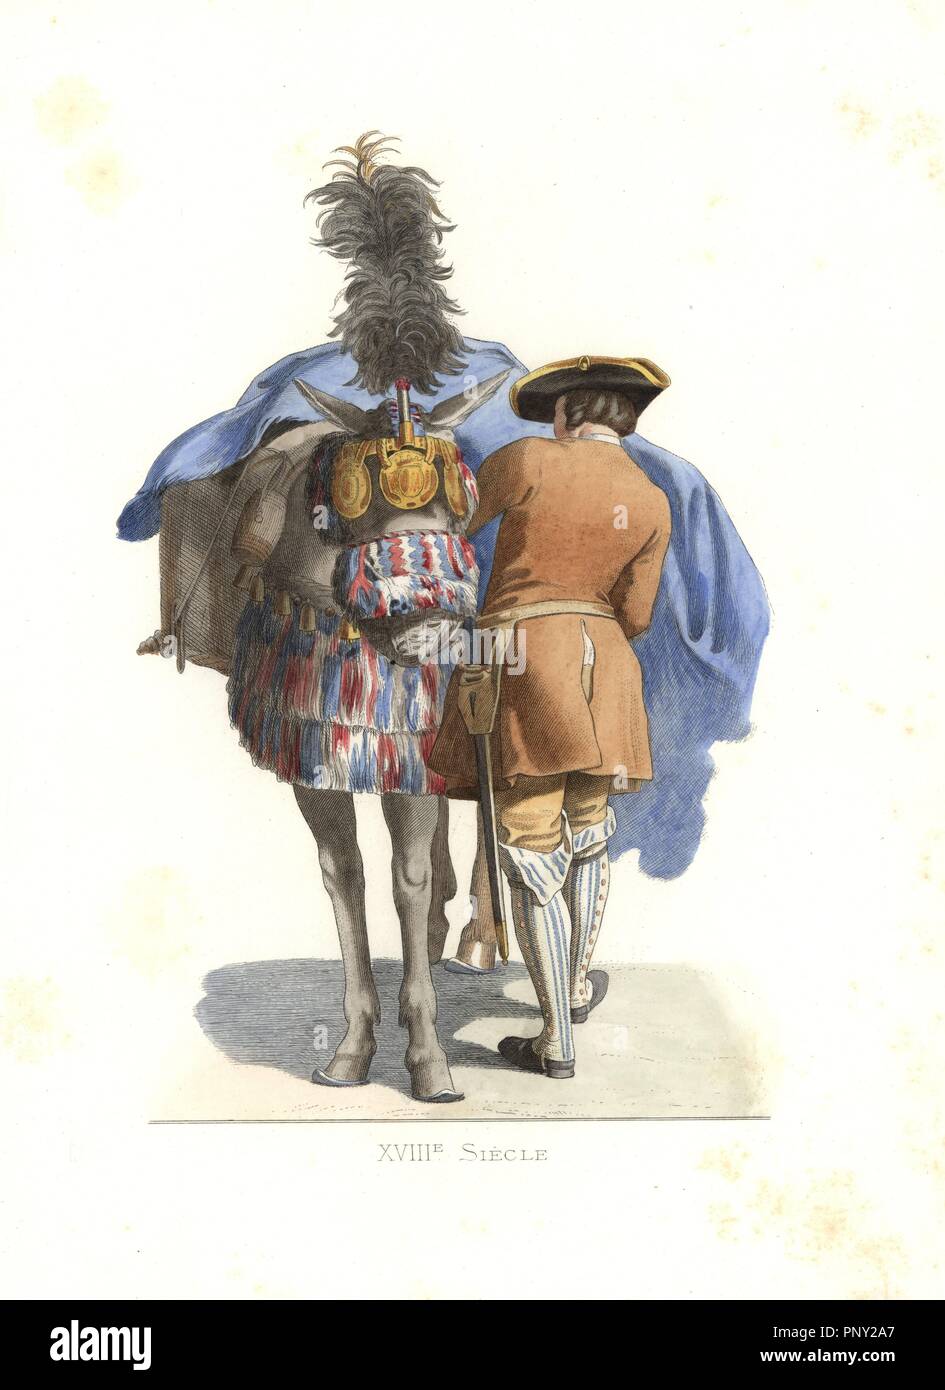 An equestrian servant, France, 18th century, from a painting by Carle Van Loo. Handcolored illustration by E. Lechevallier-Chevignard, lithographed by A. Didier, L. Flameng, F. Laguillermie, from Georges Duplessis's 'Costumes historiques des XVIe, XVIIe et XVIIIe siecles' (Historical costumes of the 16th, 17th and 18th centuries), Paris 1867. The book was a continuation of the series on the costumes of the 12th to 15th centuries published by Camille Bonnard and Paul Mercuri from 1830. Georges Duplessis (1834-1899) was curator of the Prints department at the Bibliotheque nationale. Edmond Leche Stock Photo